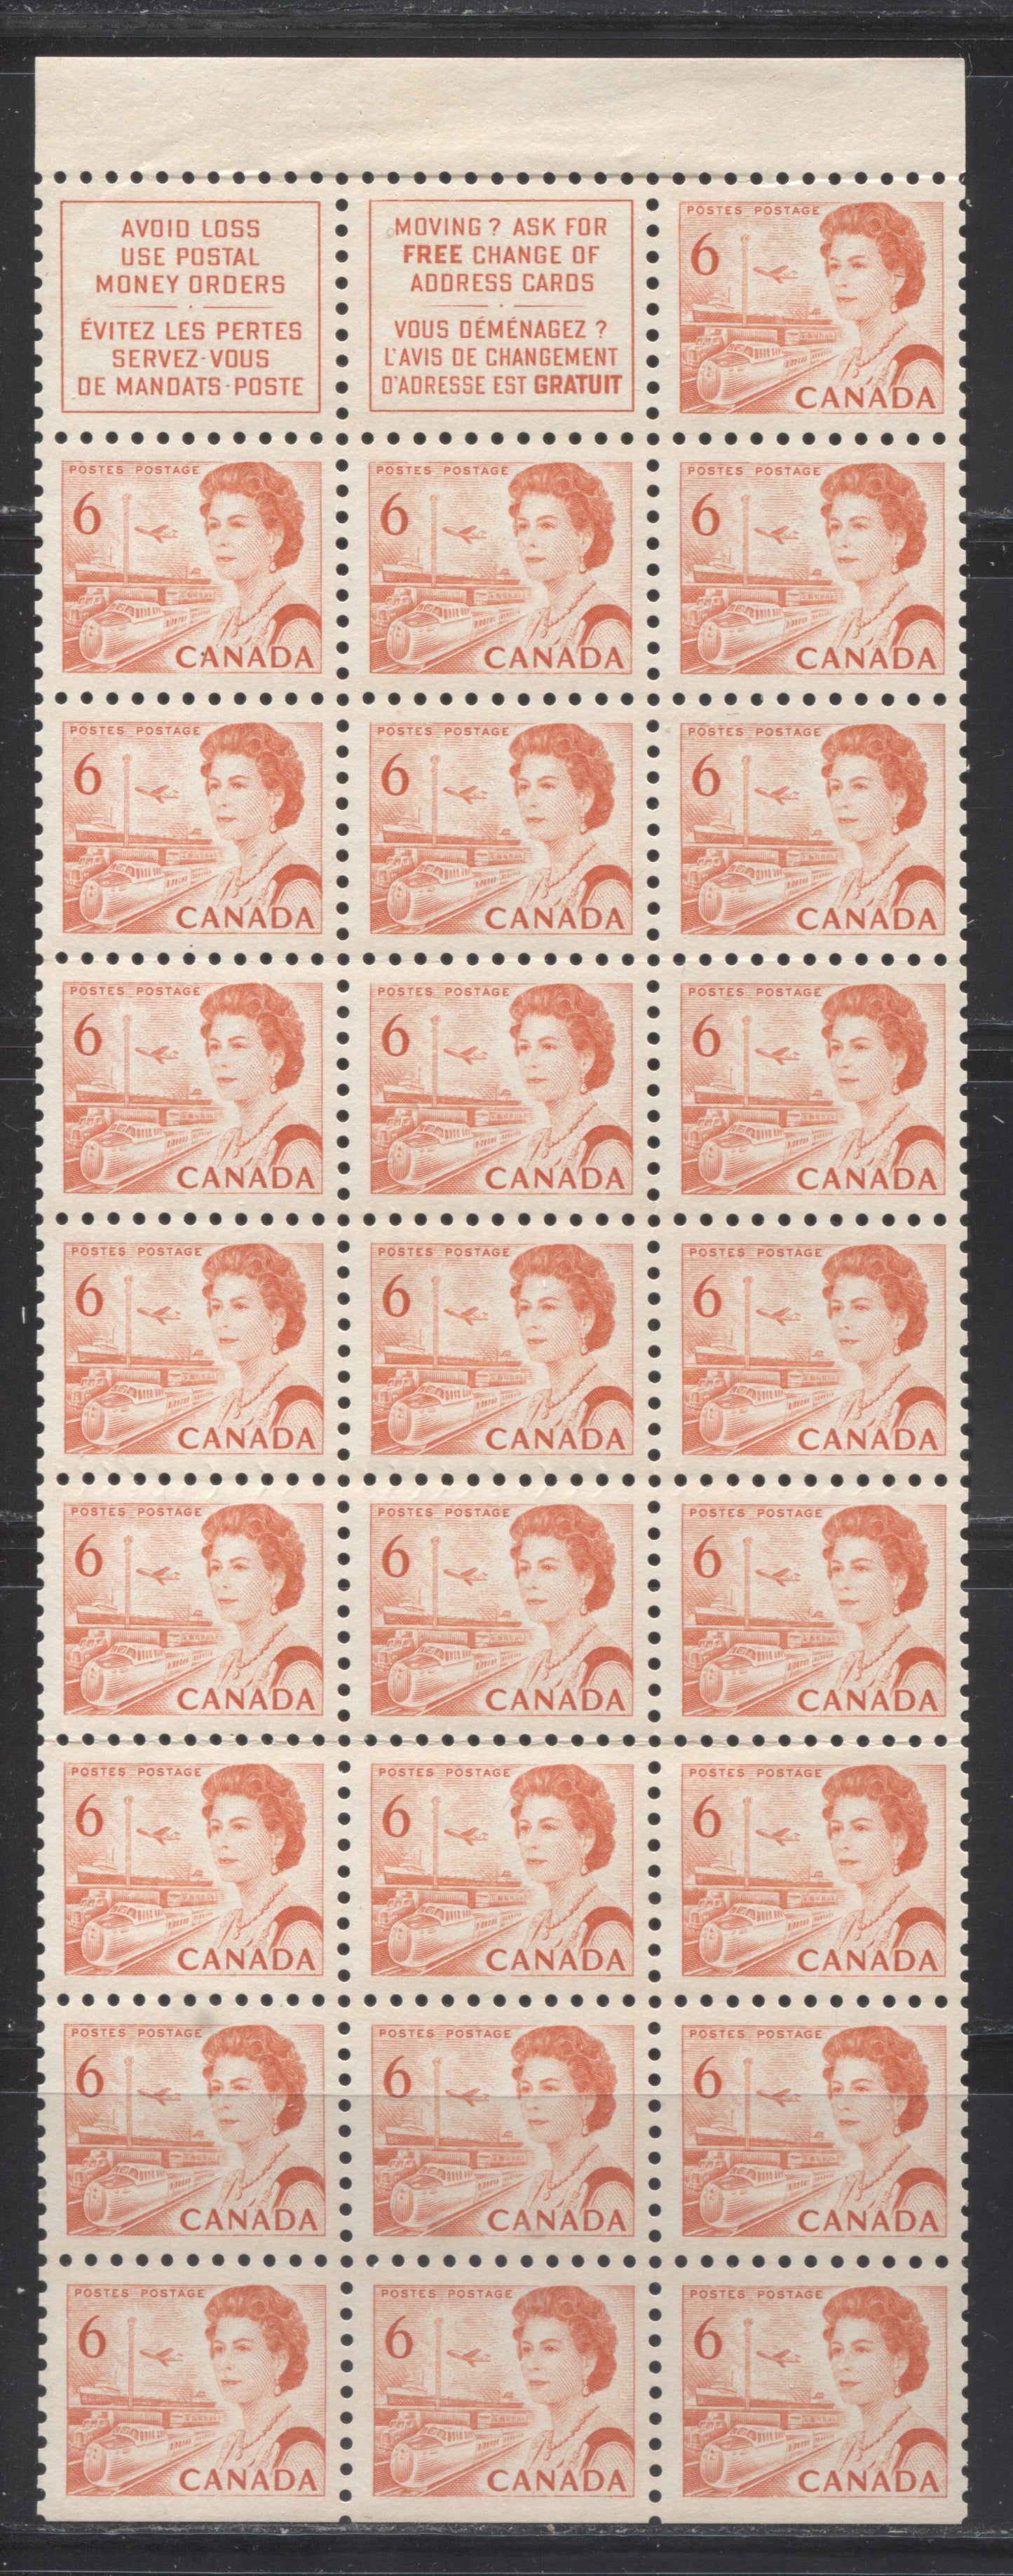 Lot 154 Canada #459a 6c Red Orange Transportation, 1967-1973 Centennial Definitive Issue, A VFNH Booklet Pane of 25 + 2 Labels, DF Bluish White Paper Showing "Mole on Lip" on Pos 9/1